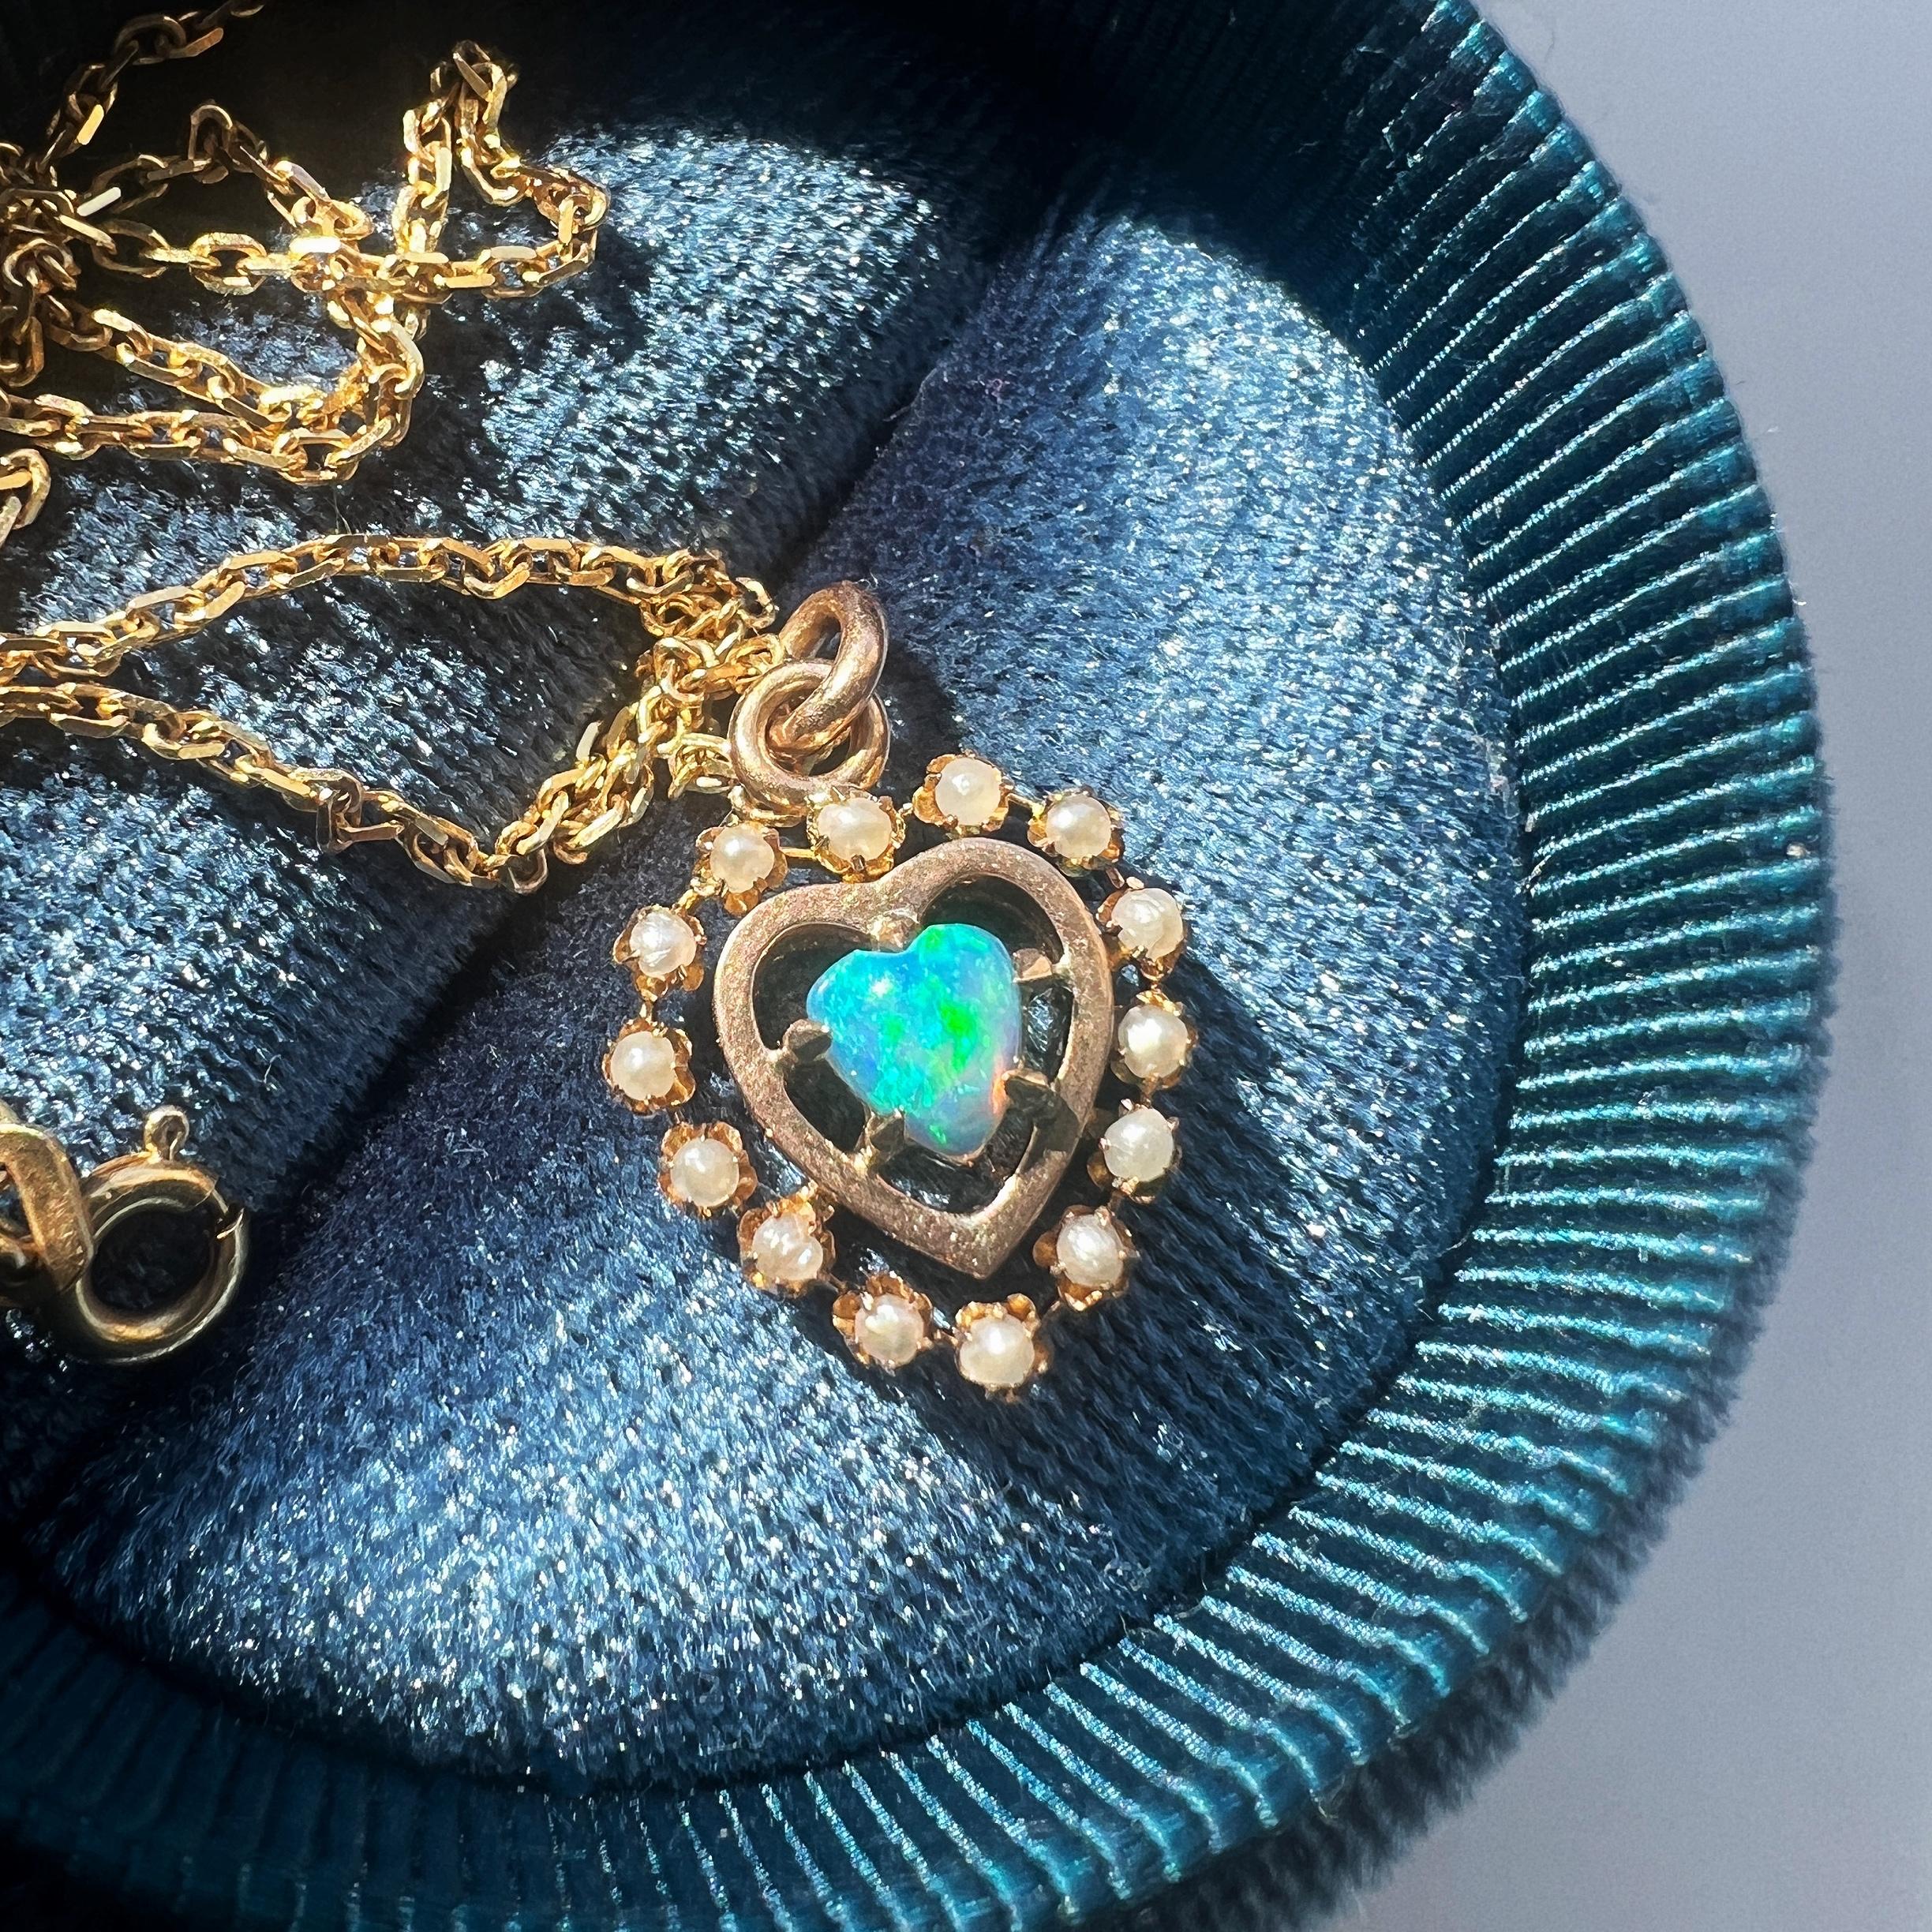 For sale a very sweet pendant featuring a lovely heart-shaped opal cabochon. The opal conveys a strong play-of-fire with a rainbow flash of mainly blue and green hues. Surrounding the opal is a delicate circle of lustrous 14 white seed pearls, which